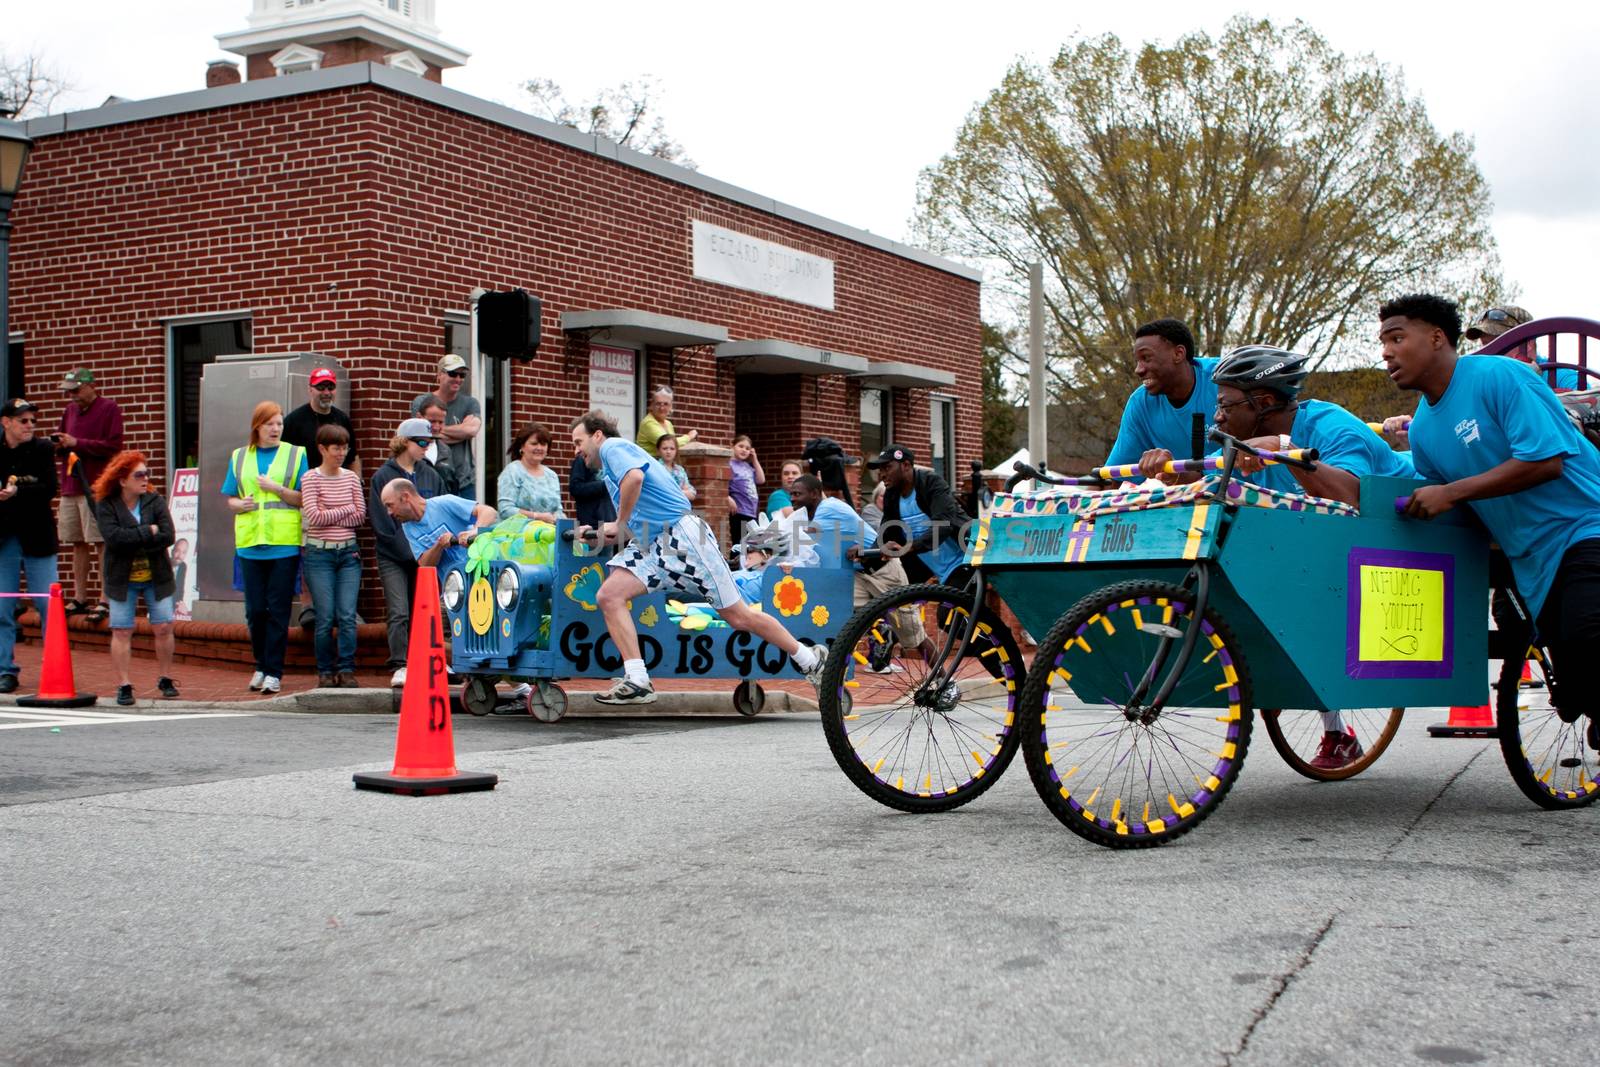 Lawrenceville, GA, USA - March 29, 2014:  Two teams push silly looking beds around a downtown street corner in the annual Lawrenceville Bed Race, to benefit a local Gwinnett County homeless shelter.